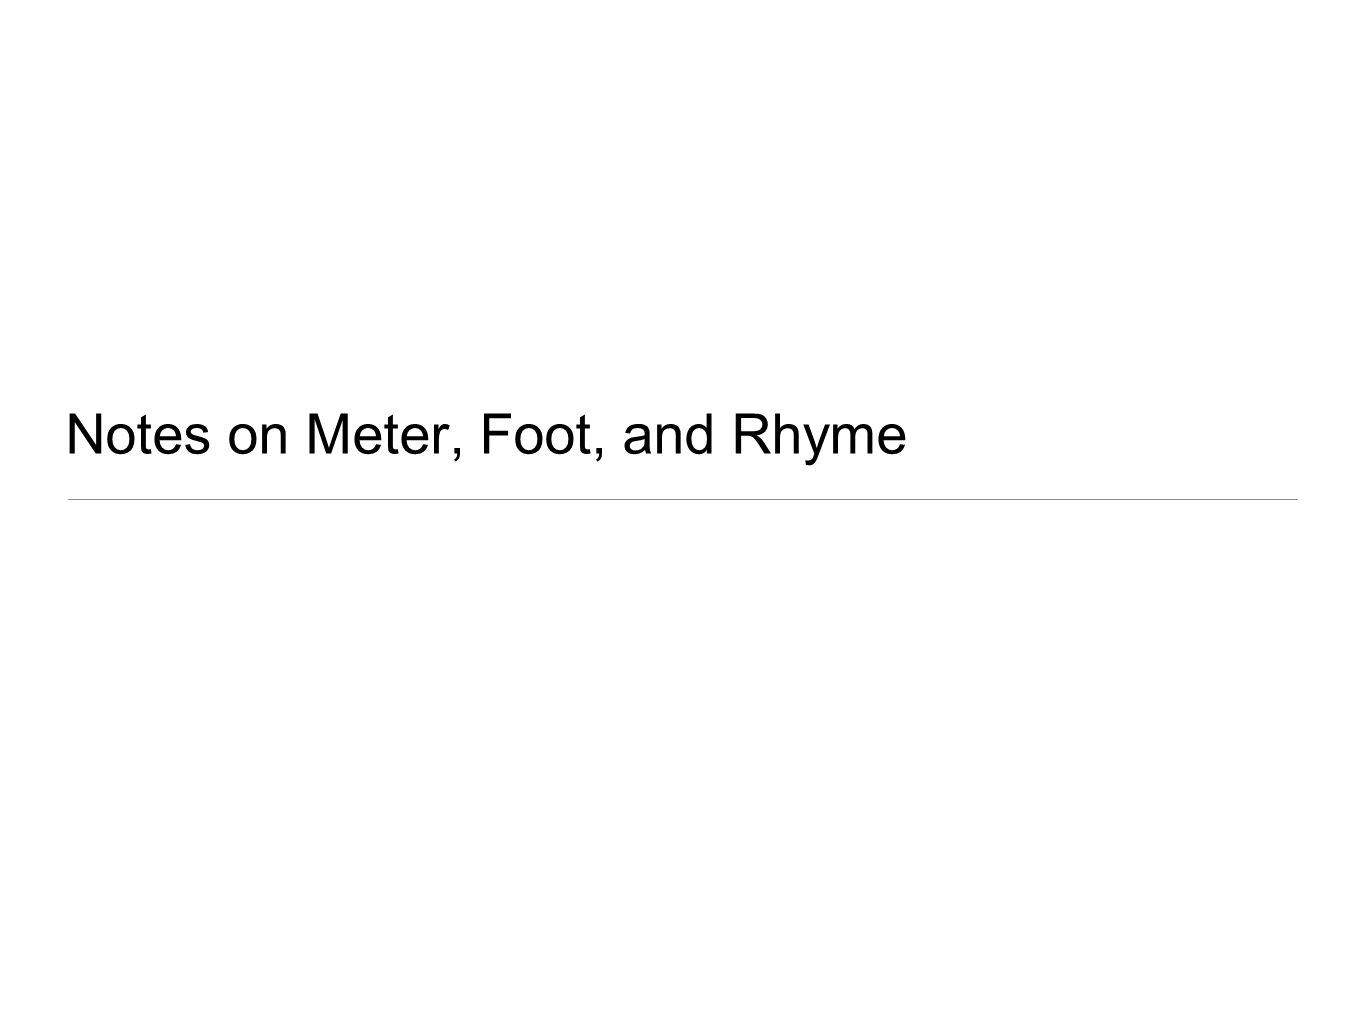 Notes on Meter, Foot, and Rhyme